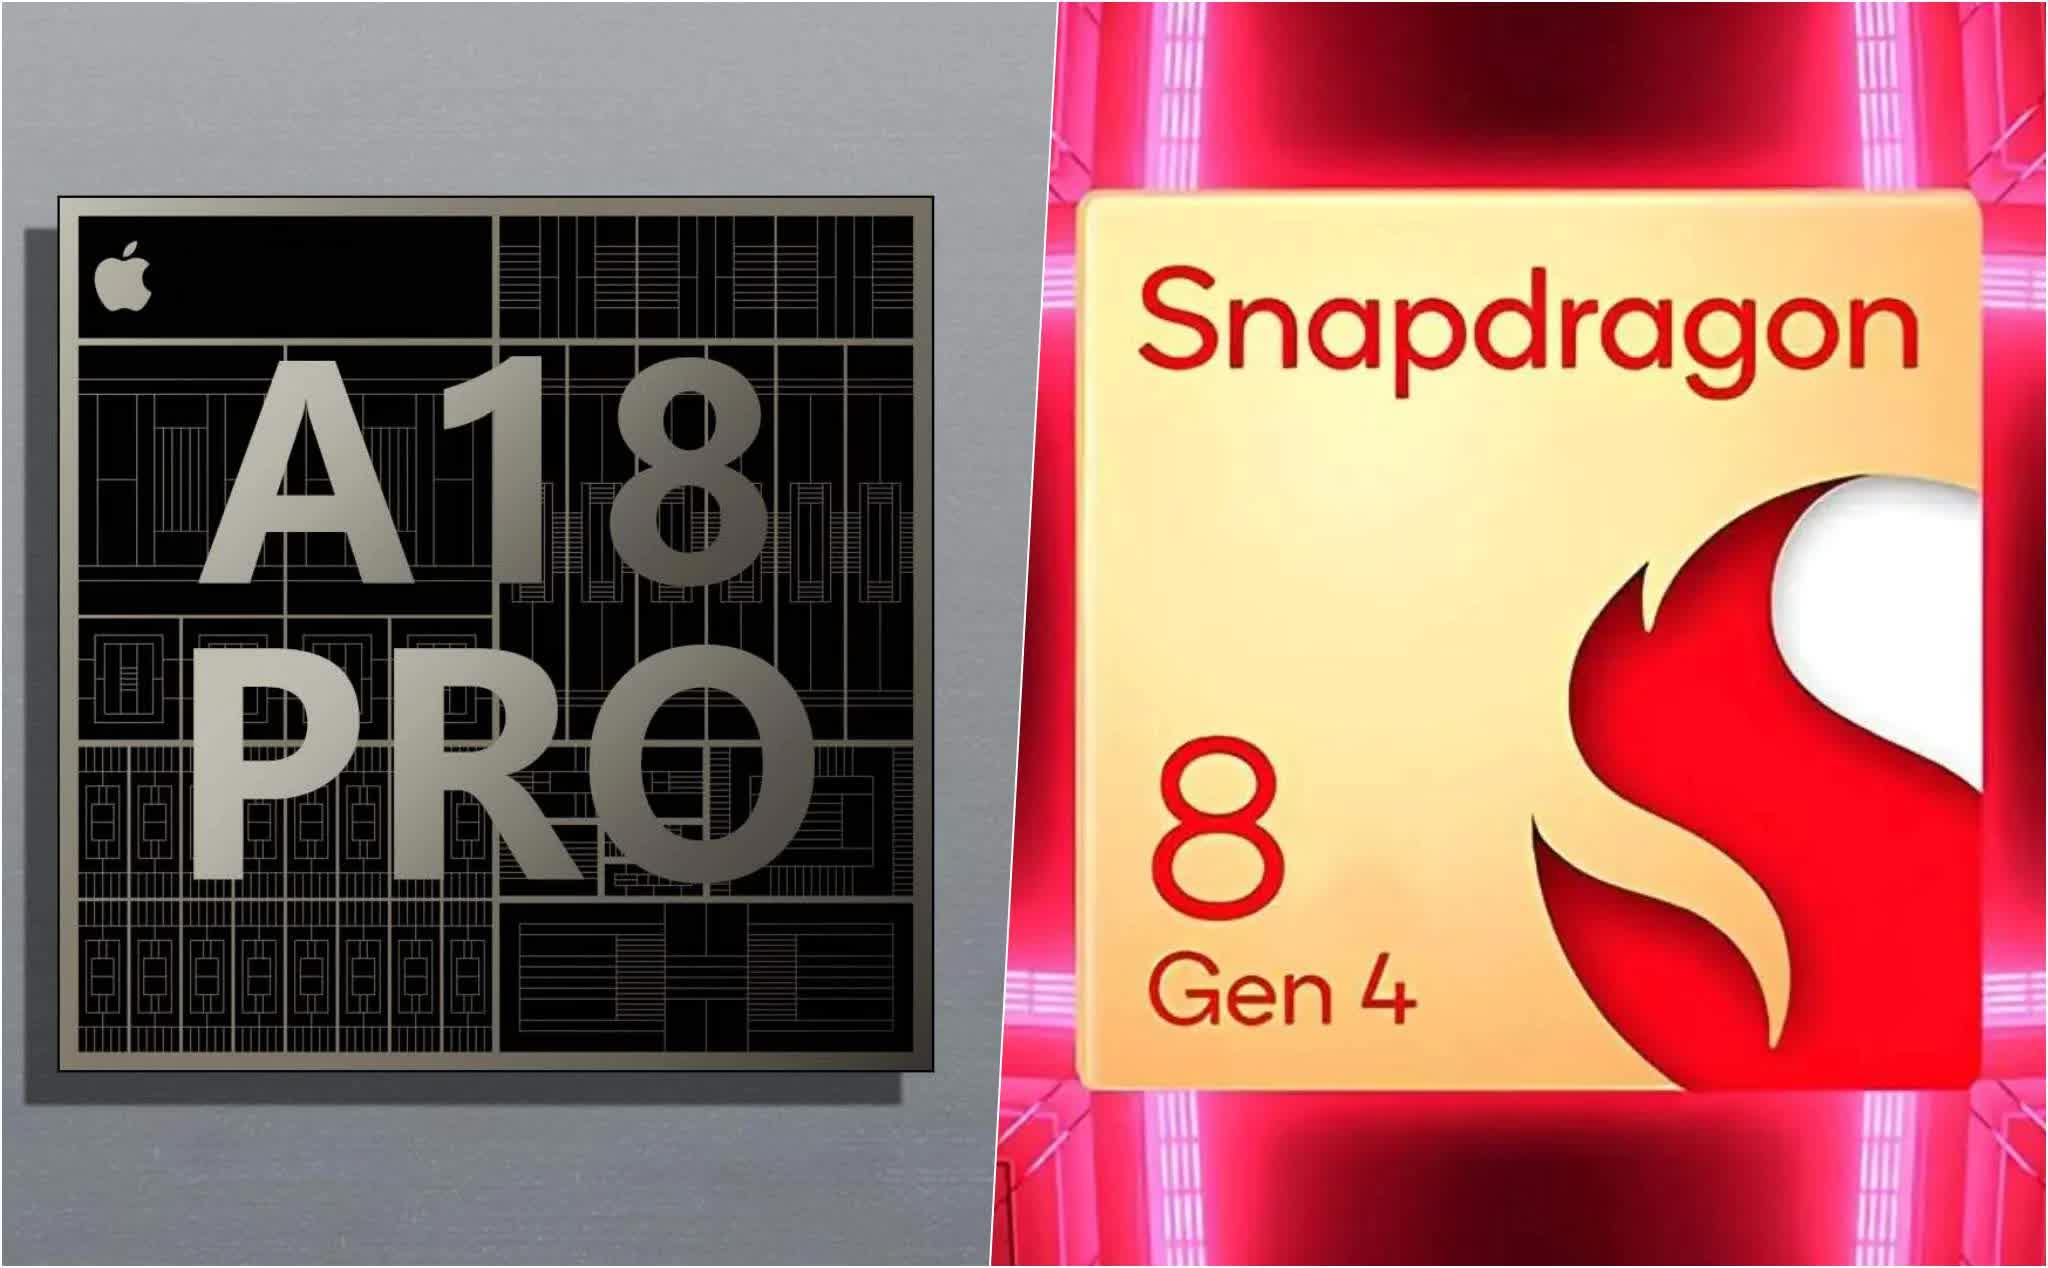 The Snapdragon 8 Gen 4 may support LPDDR6, while the Apple A18 Pro will likely use LPDDR5T